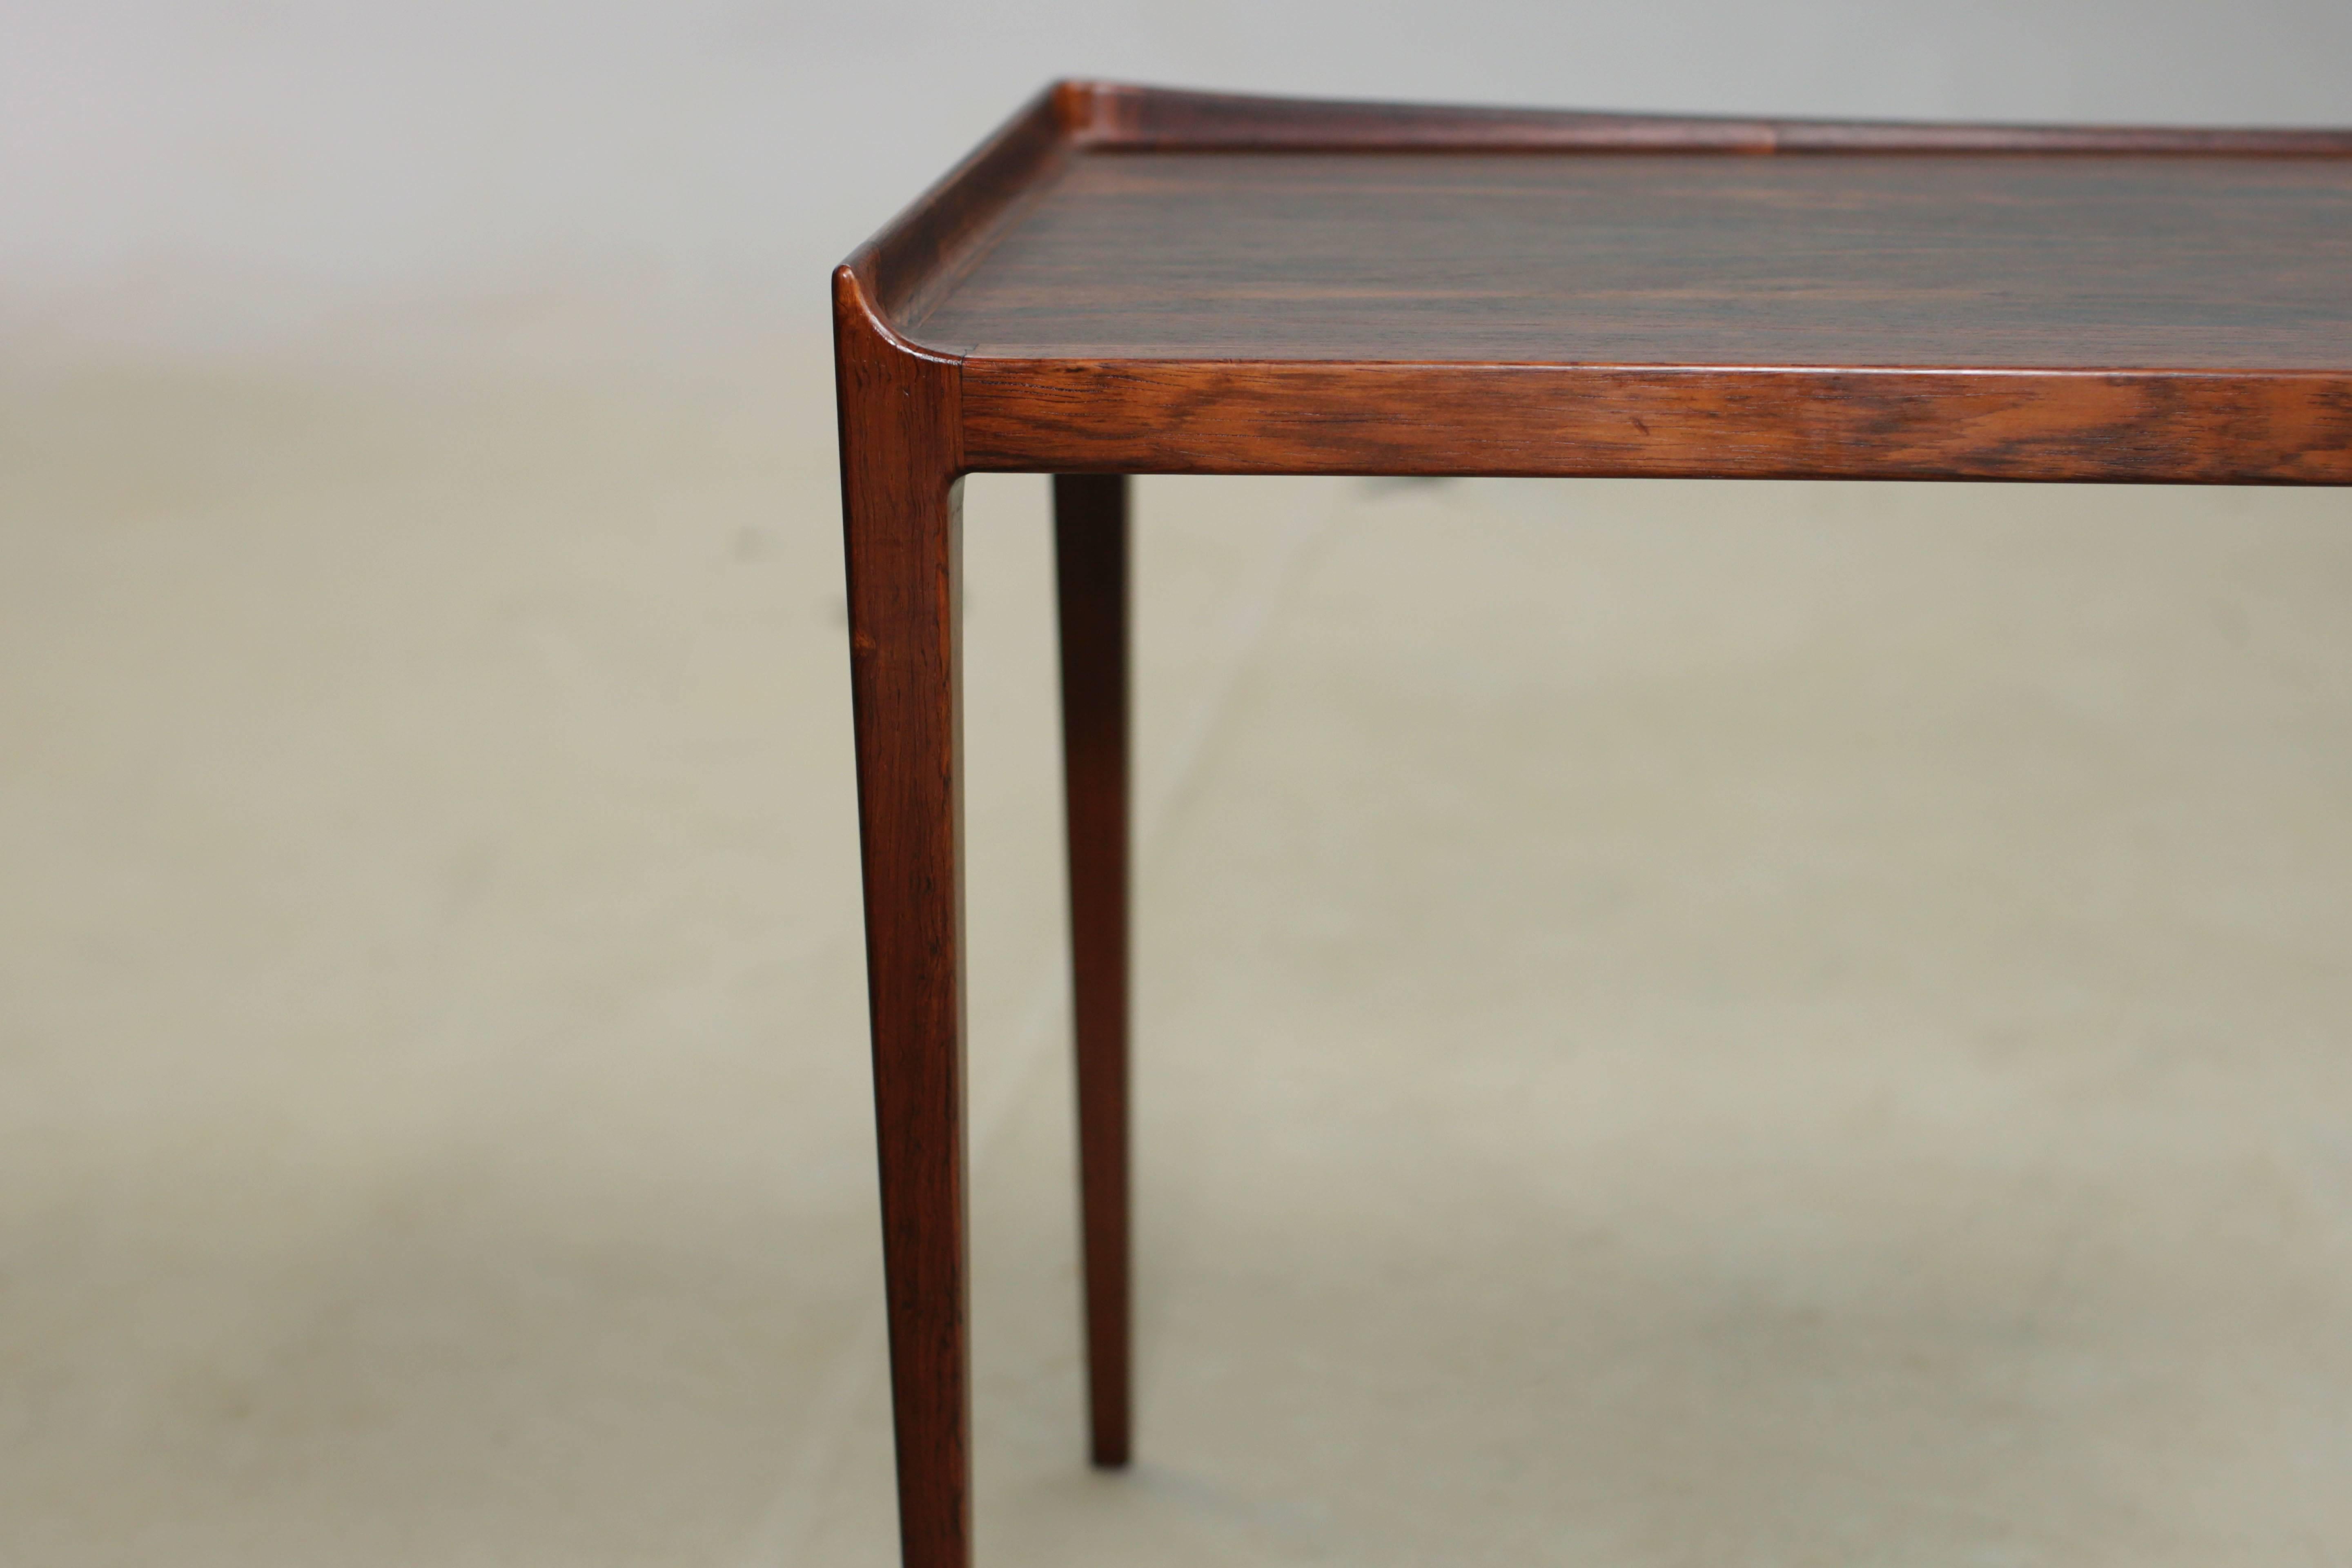 Vintage, 1960s, Kurt Ostervig nesting tables.

This set of rosewood nesting tables are in like-new condition. Having small extra tables can be a party saver. The each small table is 17" H x 14" W x 14" D. Ready for pick up,